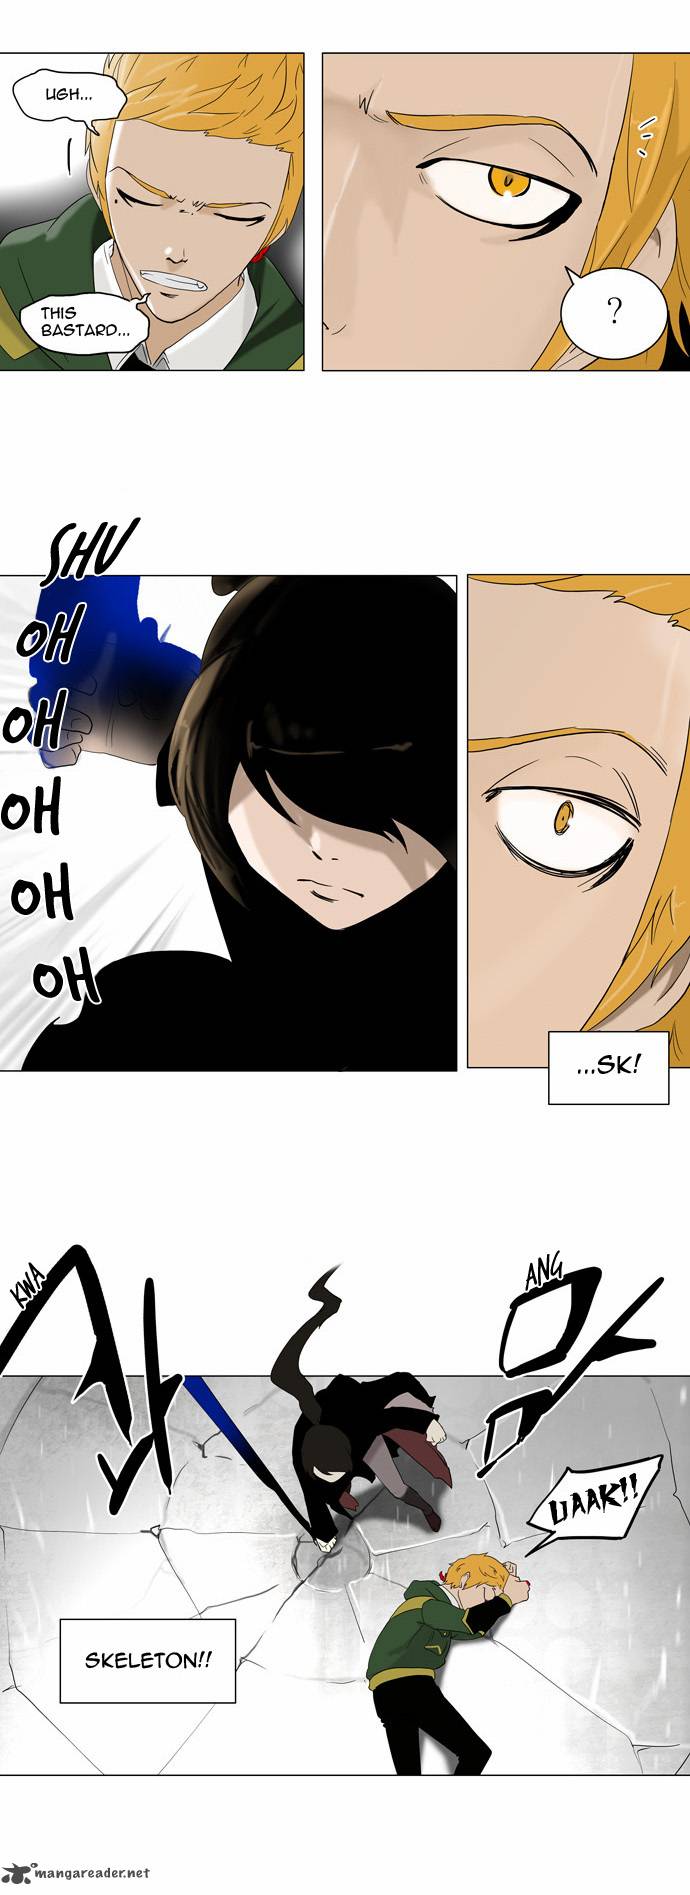 Tower Of God 84 18